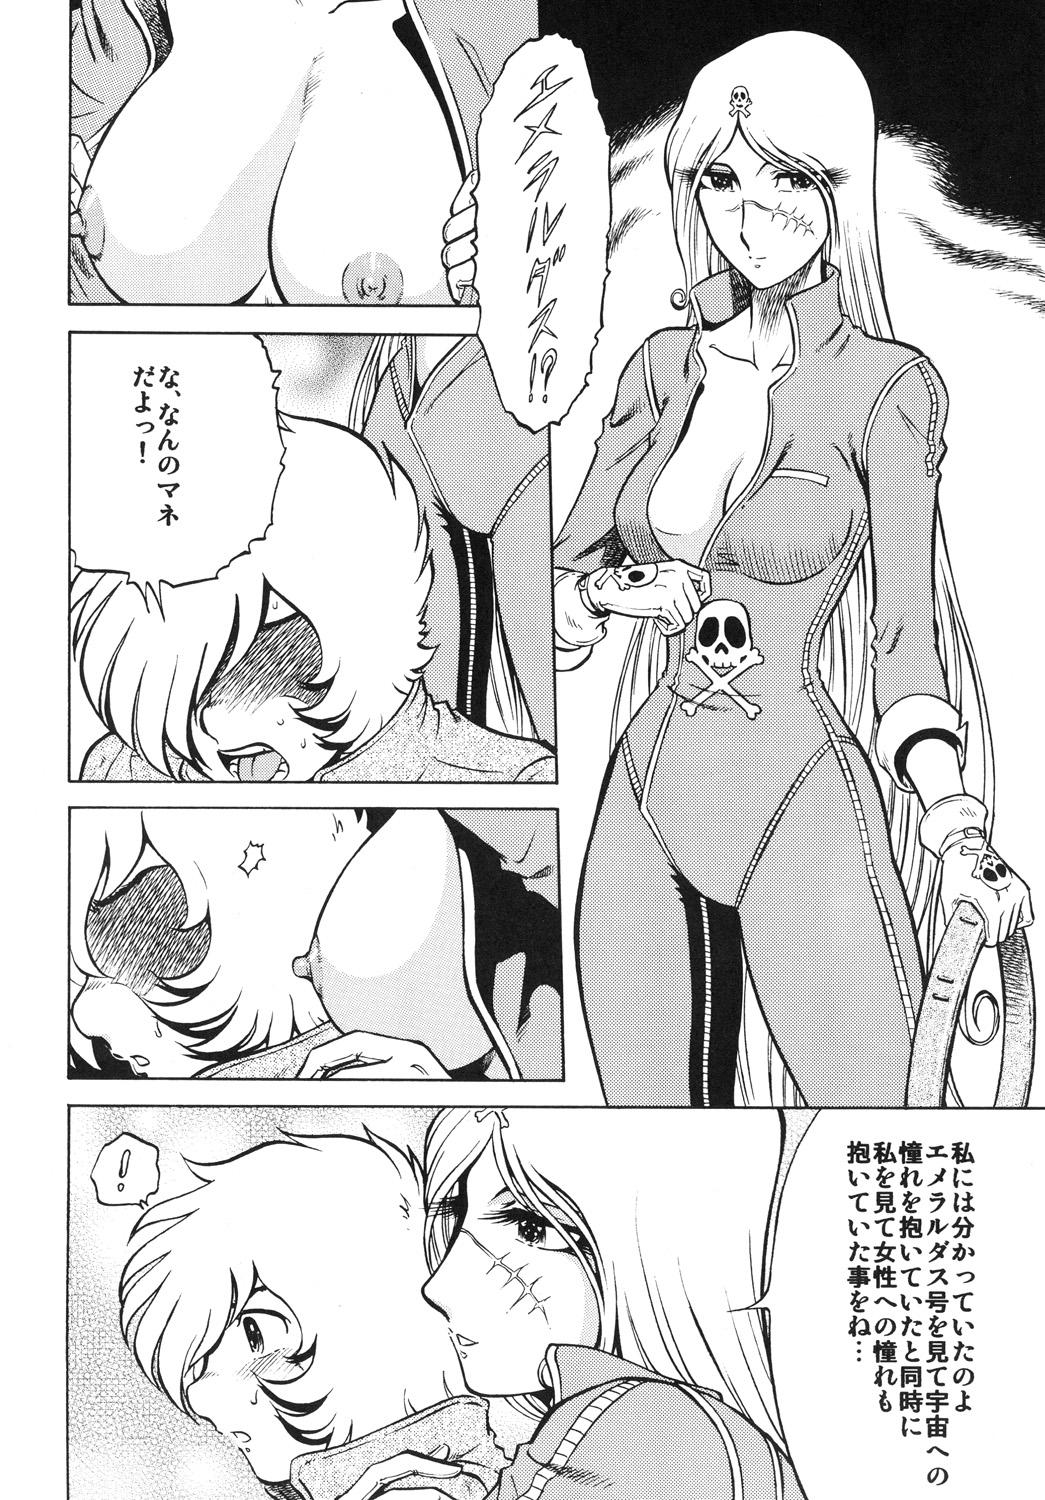 Rimjob NightHead+2 - Space pirate captain harlock Gay 3some - Page 9